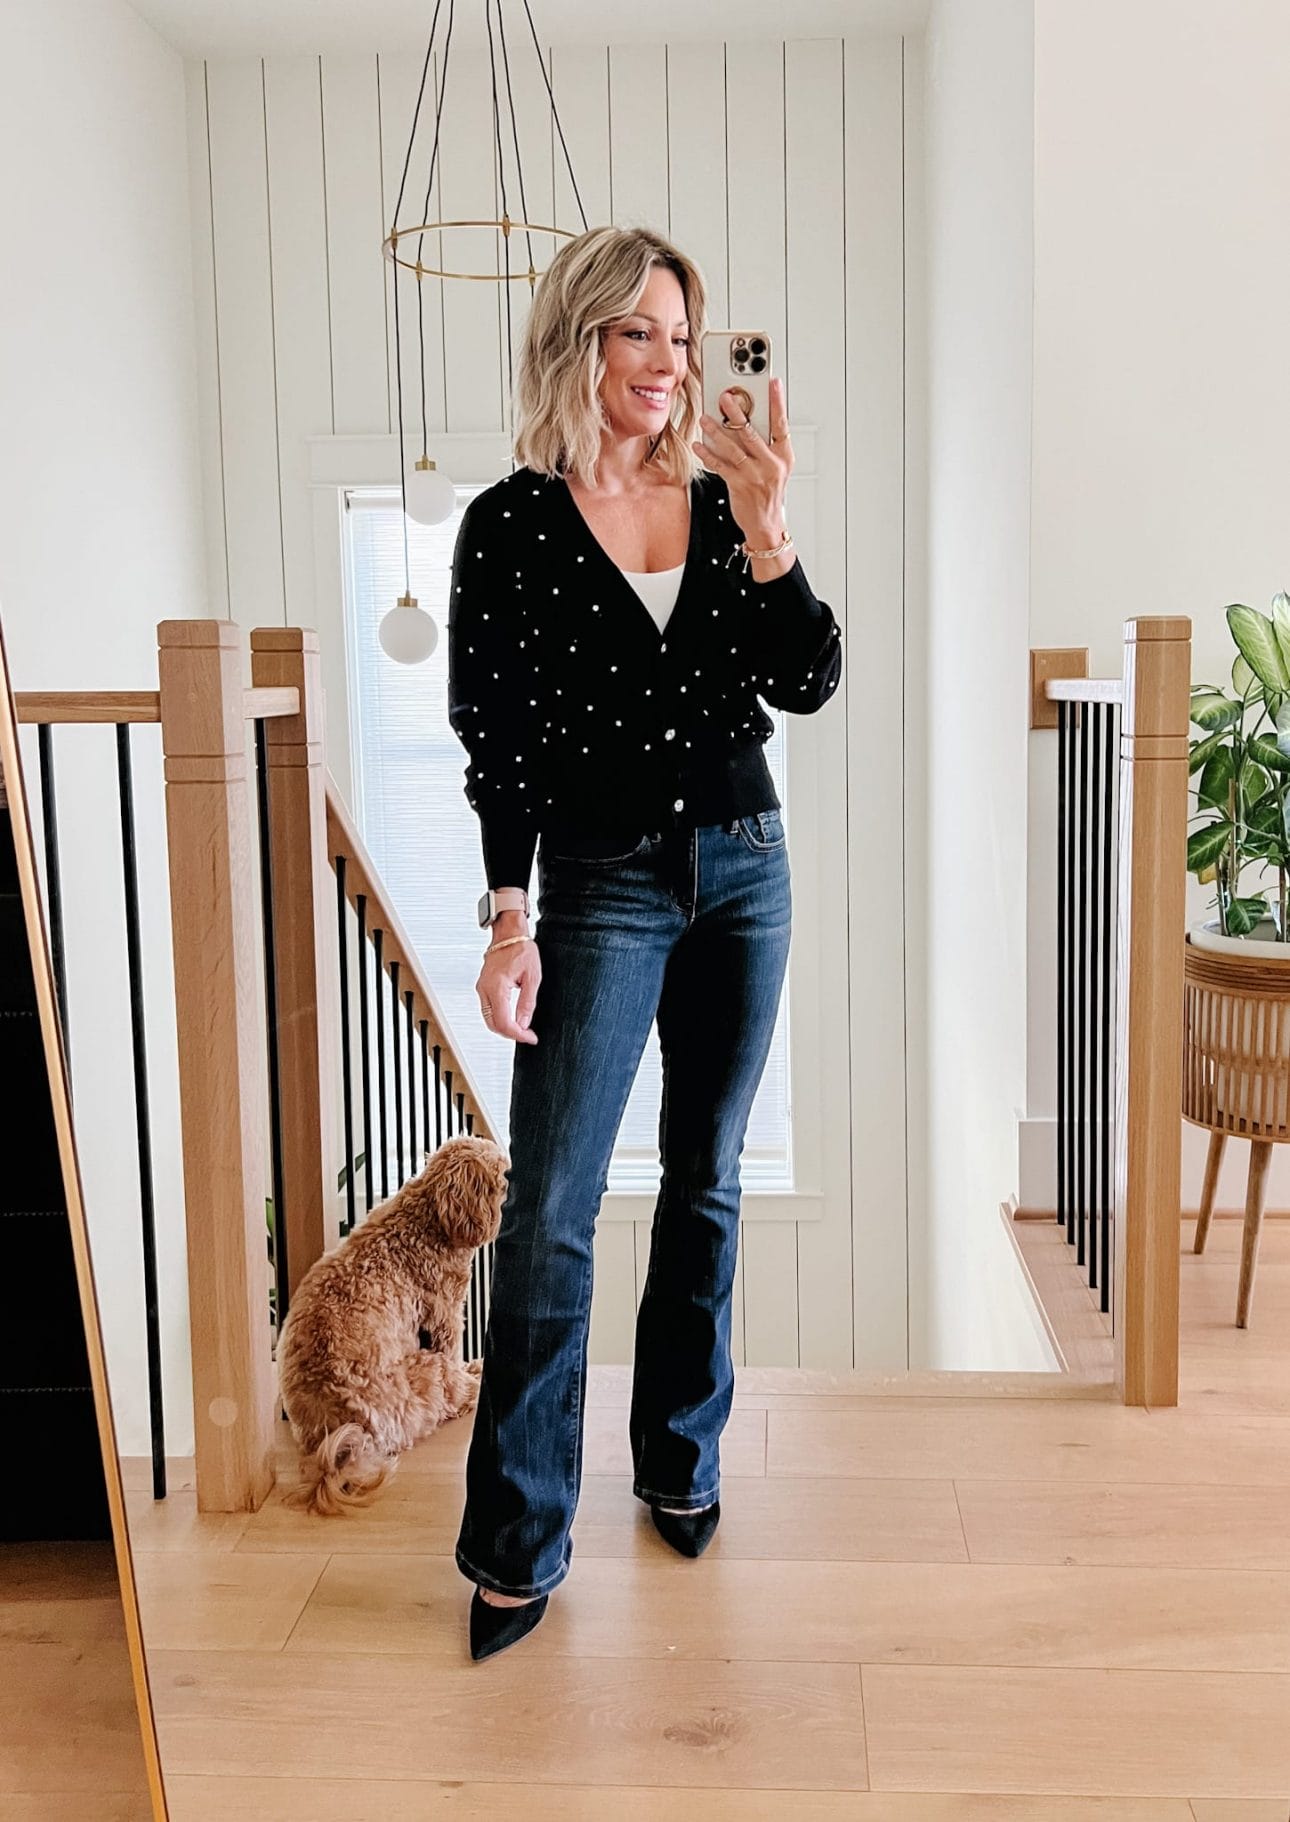 Walmart faux diamond cardigan and jeans outfit